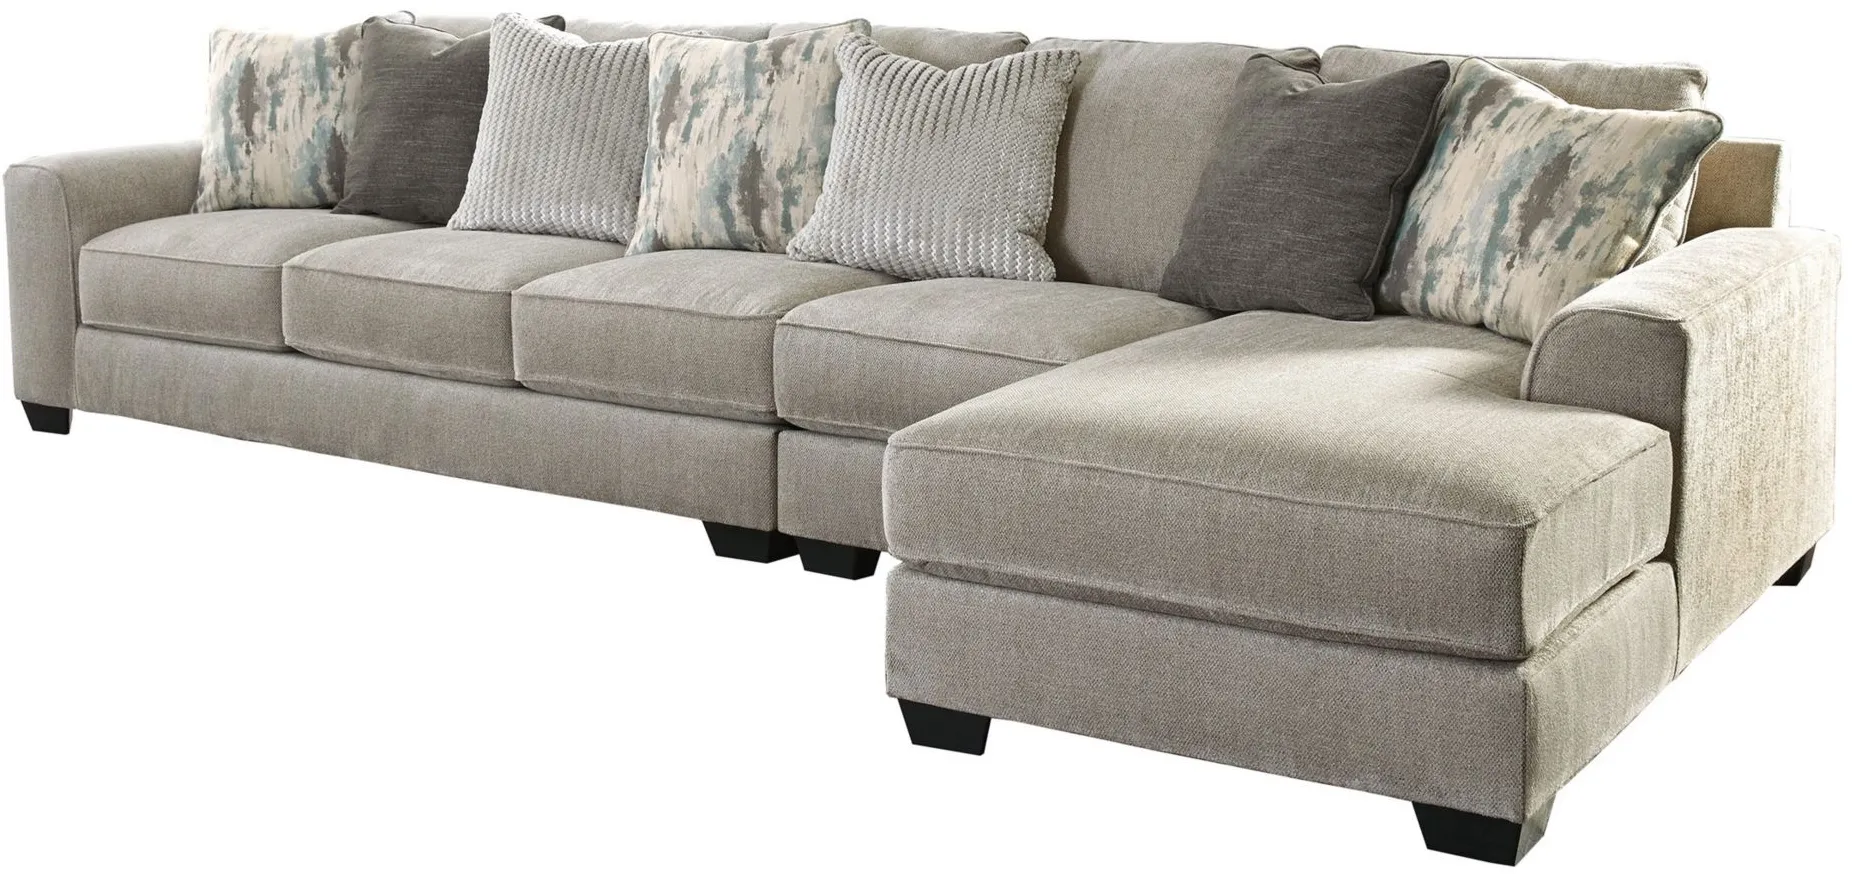 Ardsley 3-pc. Sectional with Chaise in Pewter by Ashley Furniture